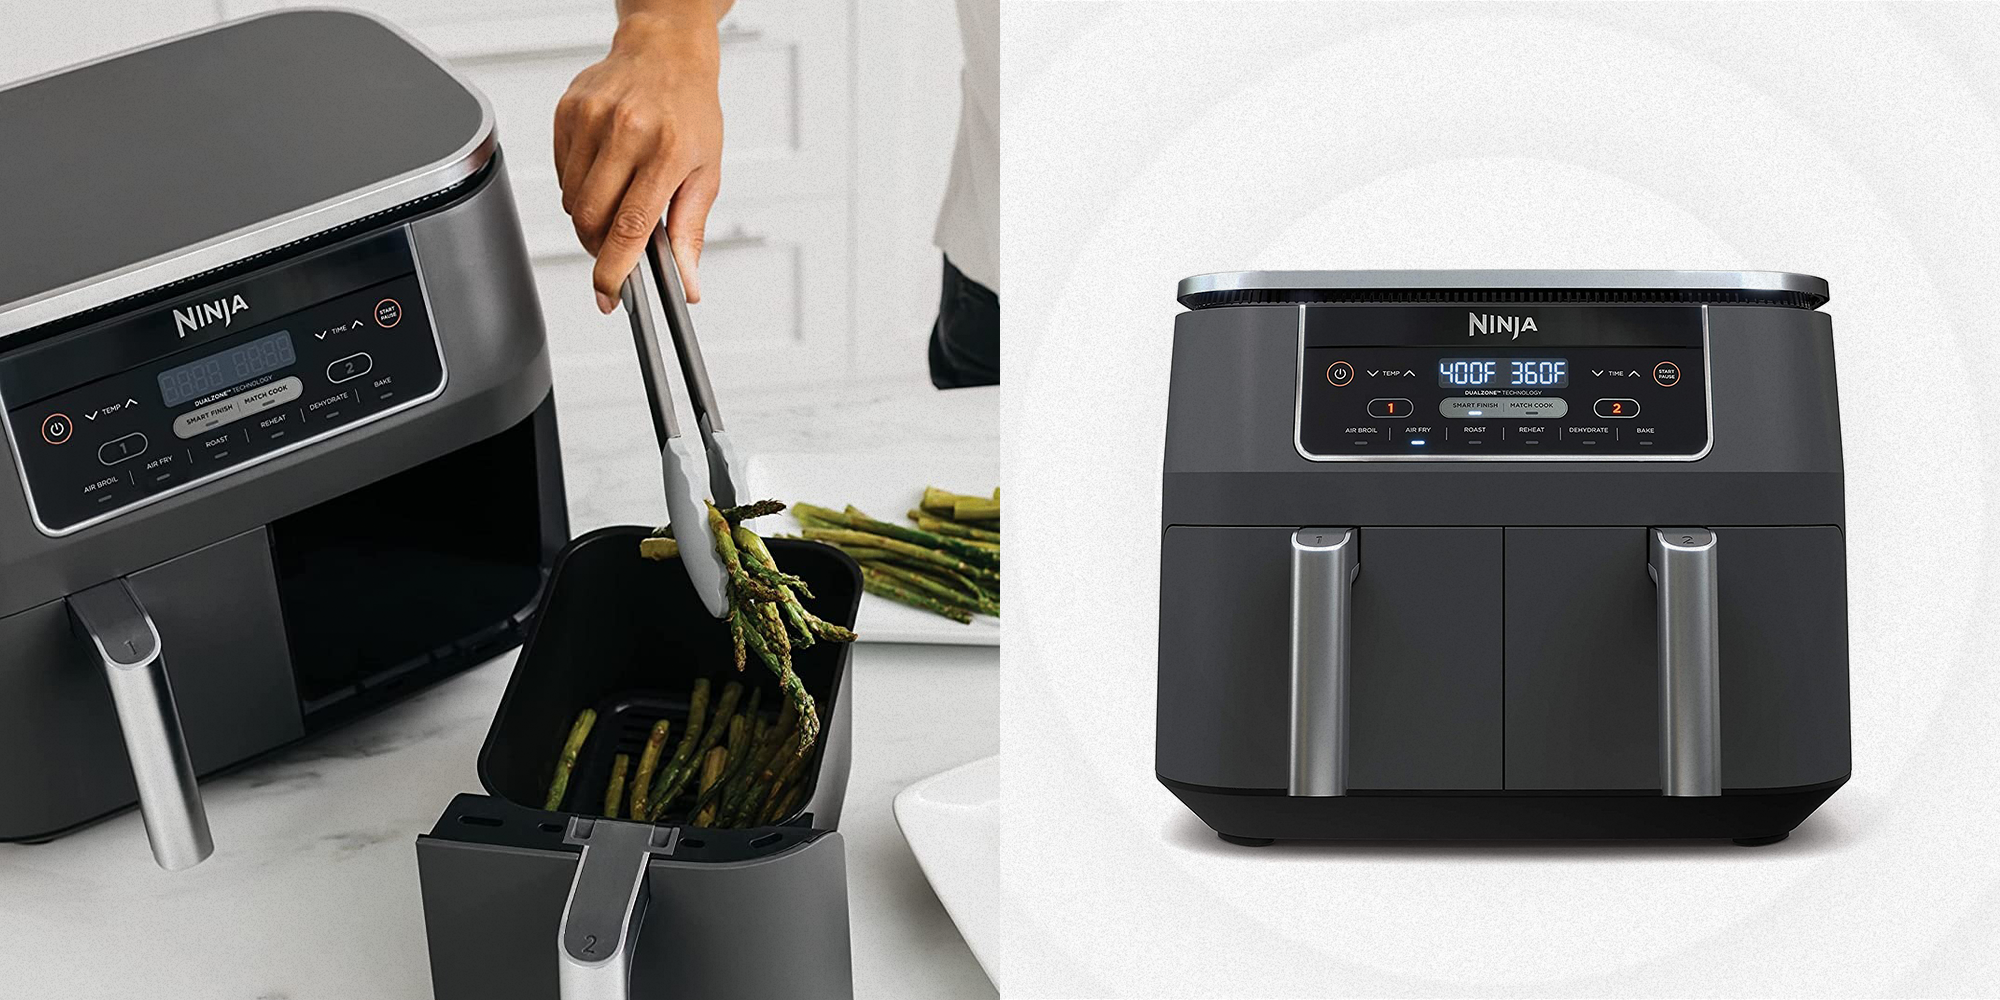 Ninja has released its iconic dual-zone air fryer in a new colourway for  the first time